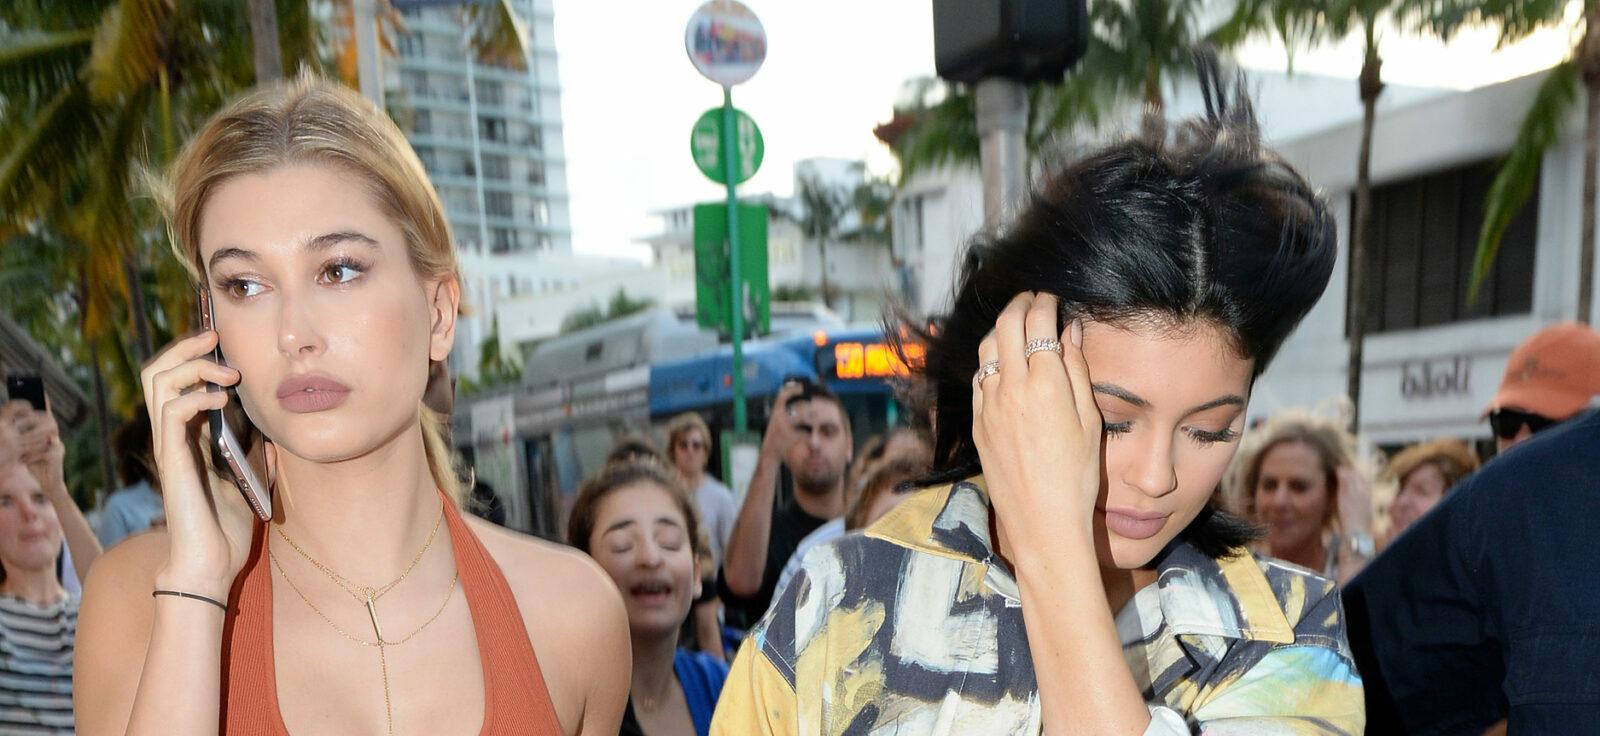 Fans Are Speculating Kylie Jenner & Hailey Bieber Are Taking Swipes At This Celeb!